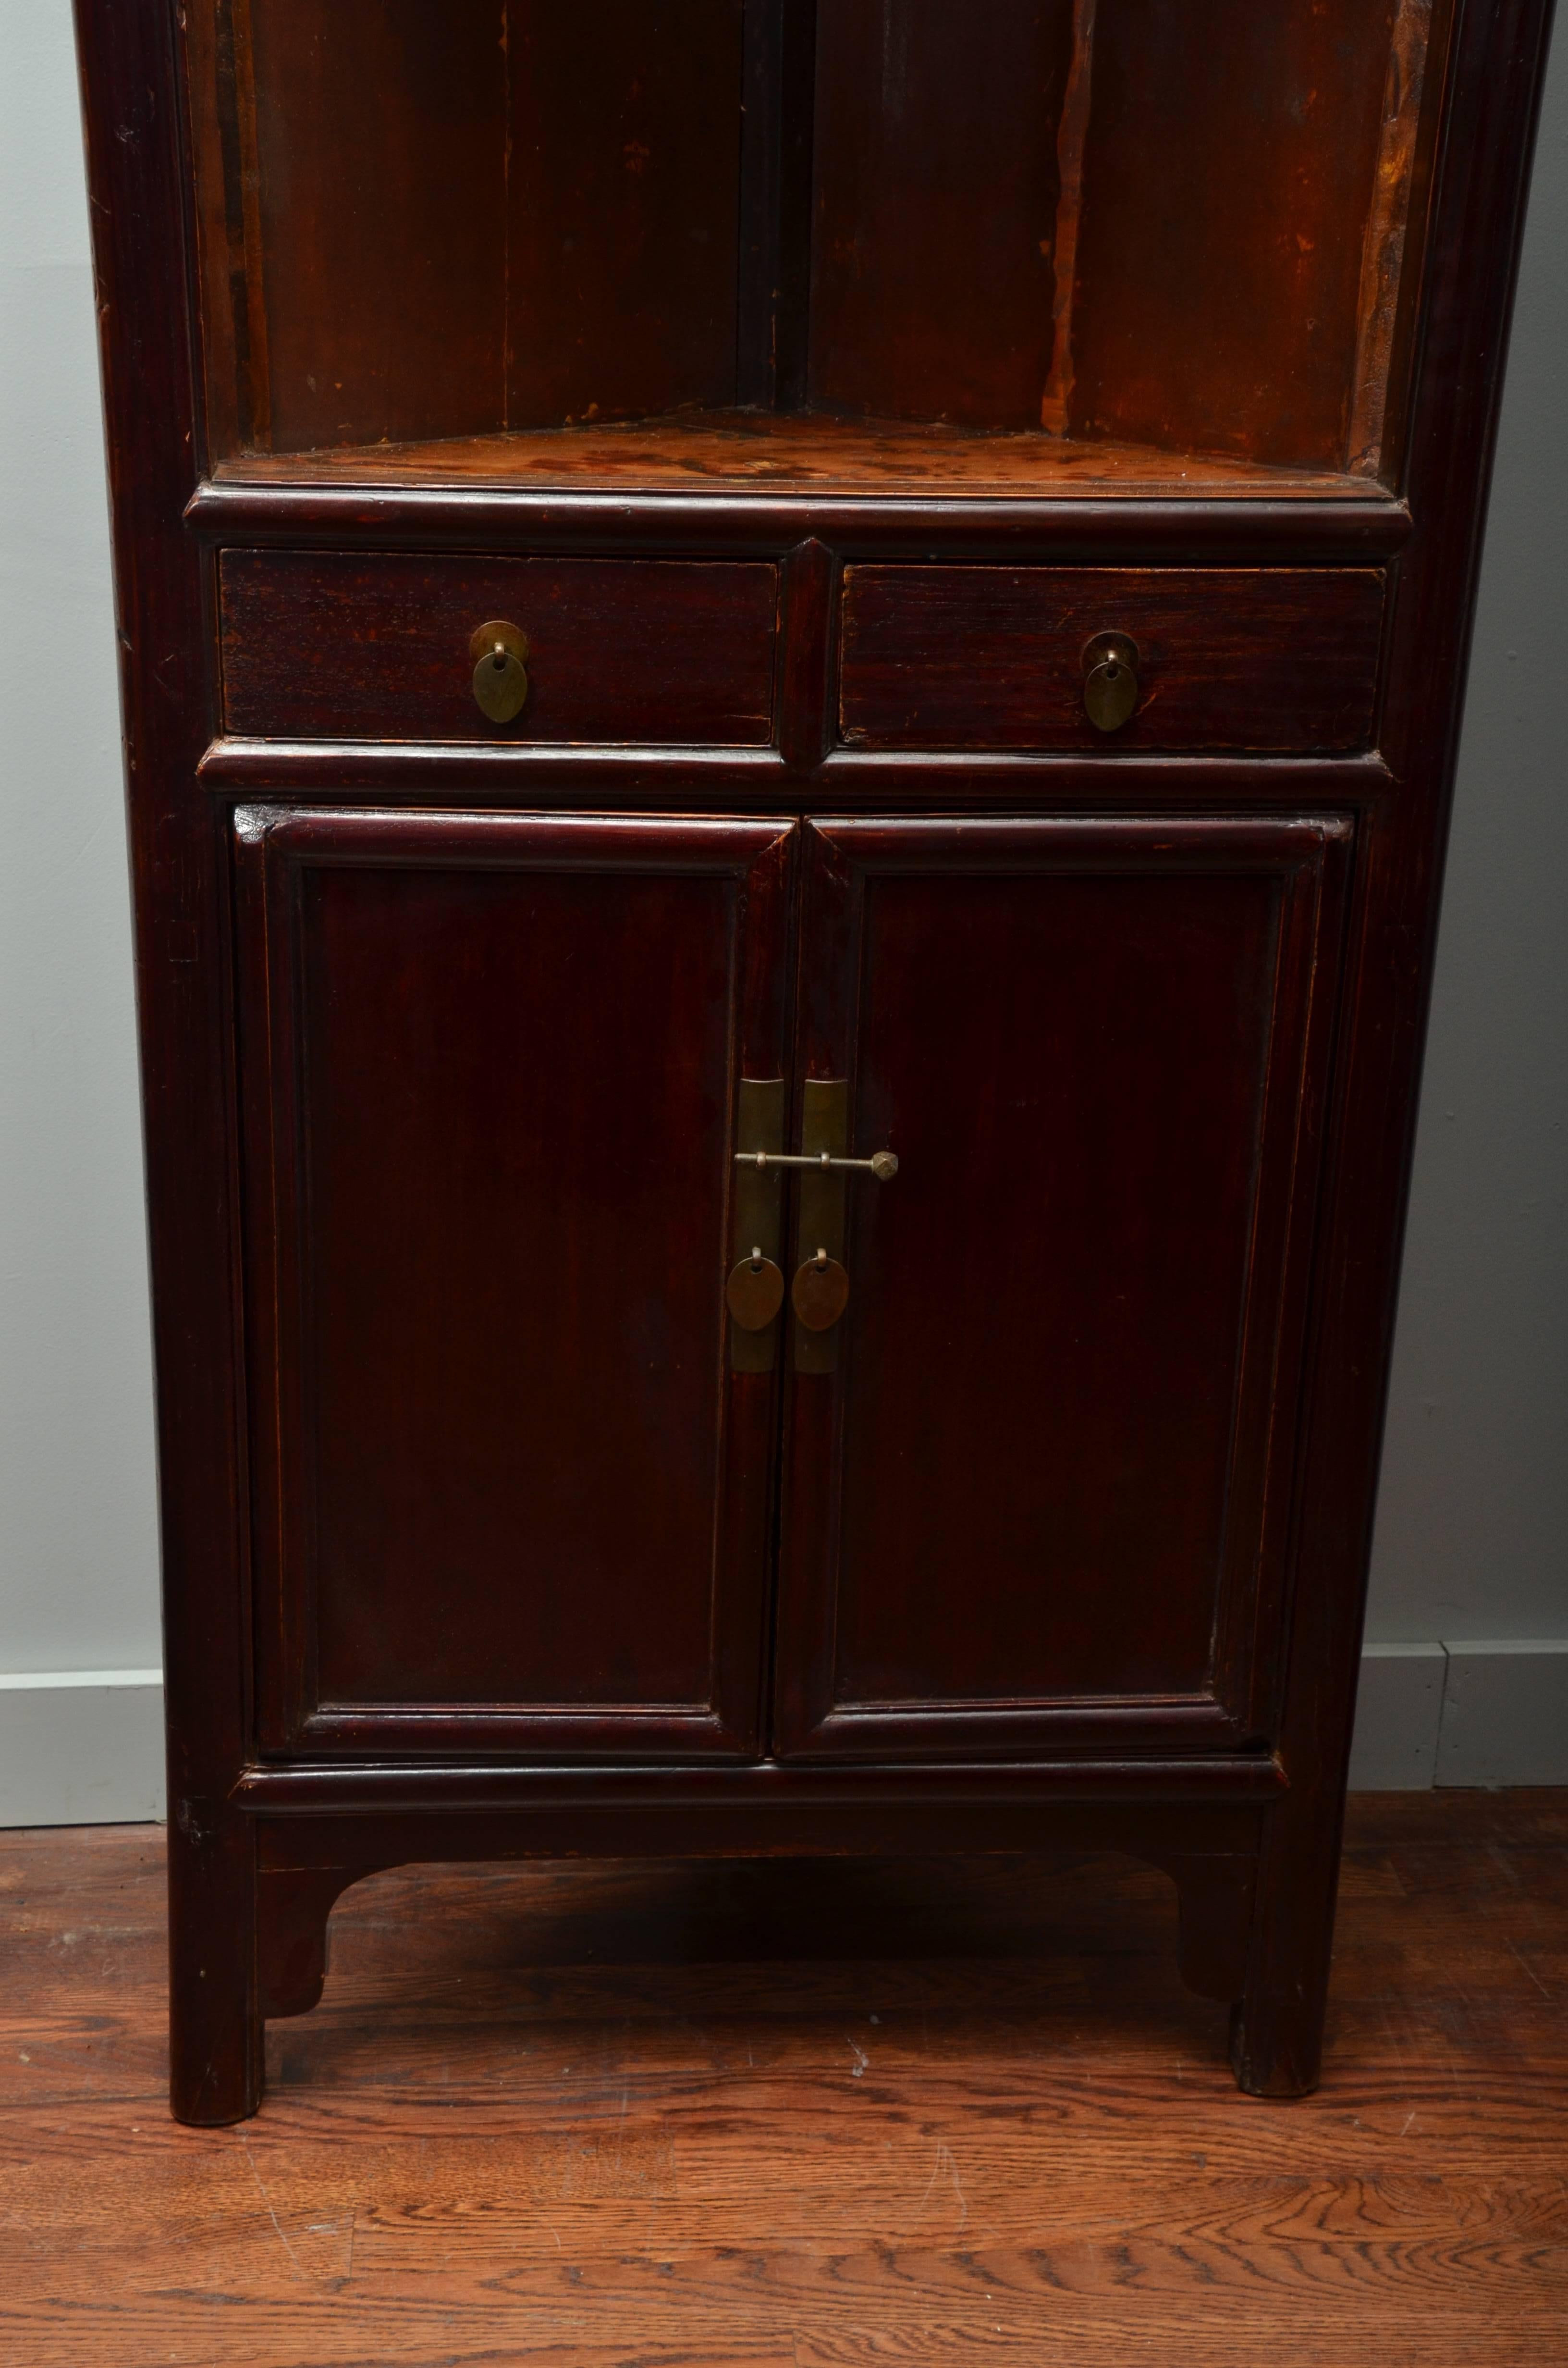 Mid-19th century Qing dynasty Jiangsu lacquered corner cabinet (one available )